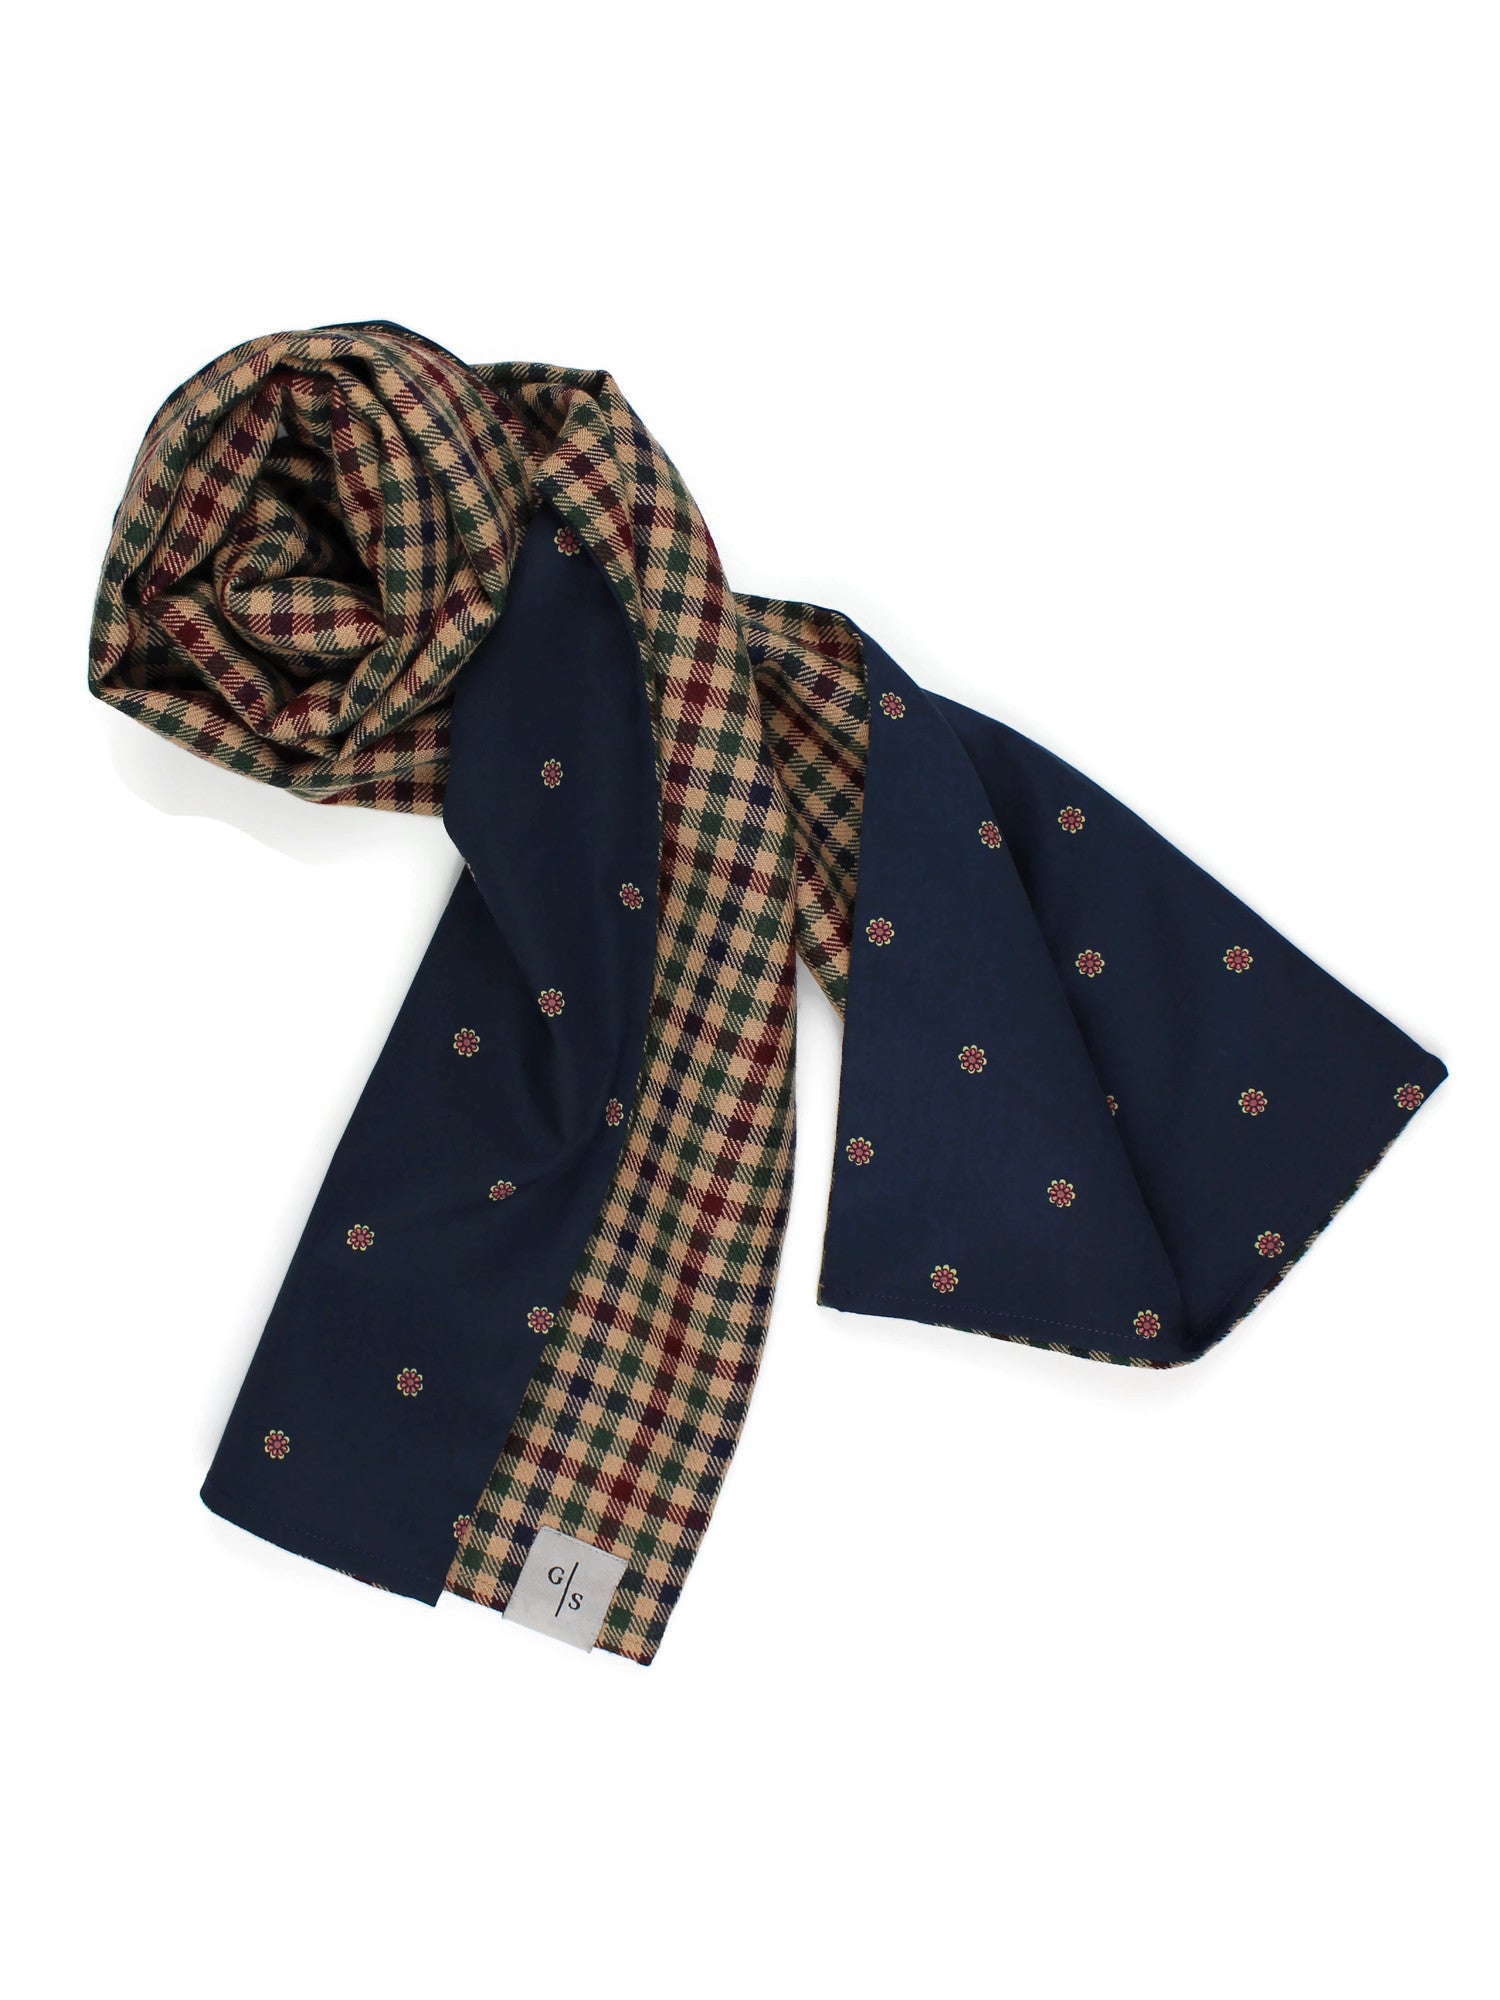 Premium Wool Check and printed Cotton Men´s Scarf, small